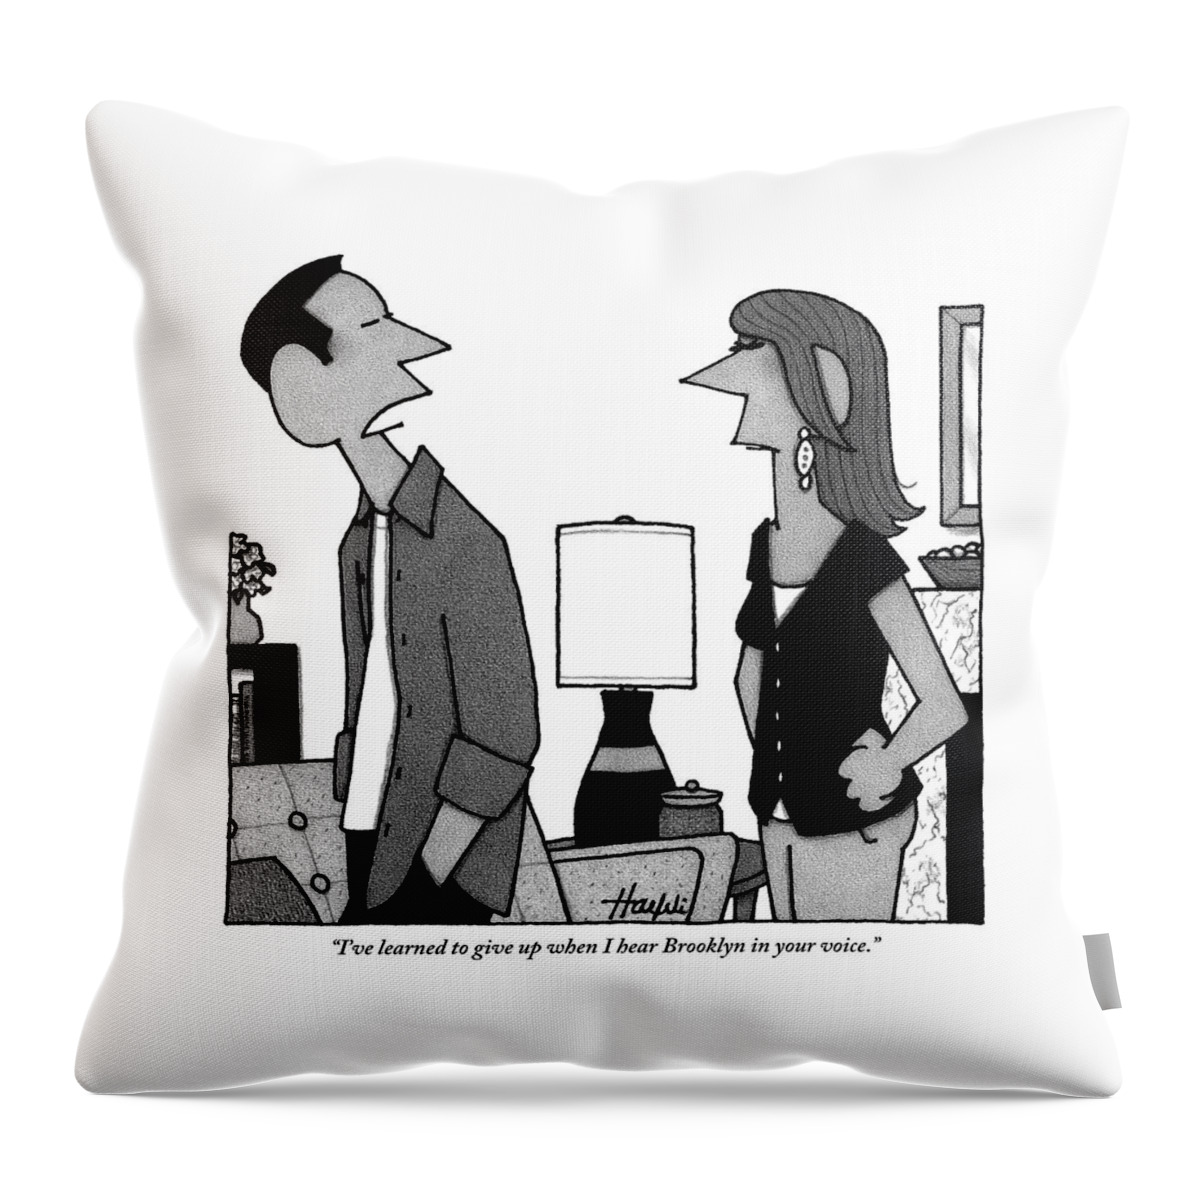 A Husband To His Wife Throw Pillow